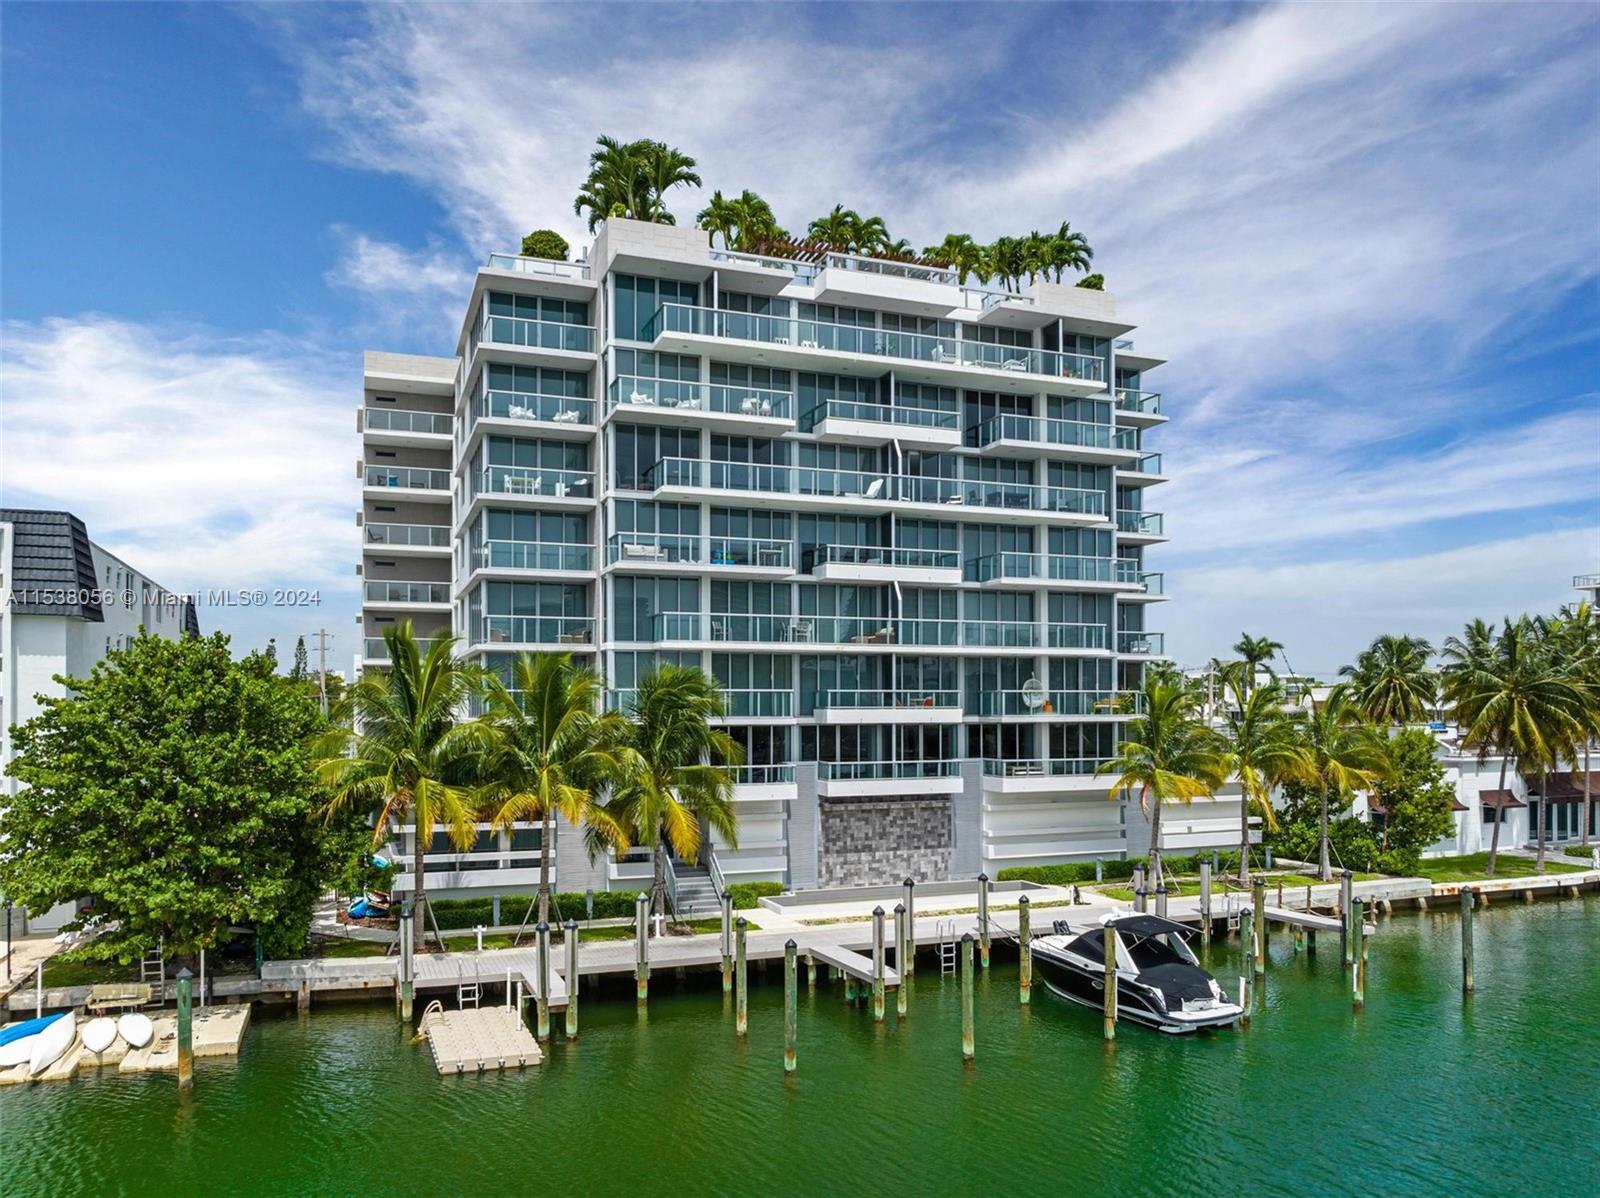 Corner 2 bed 2 bath home at Bijou Bay Harbor, a waterfront new dev built in 2021. Split floor plan with 9ft floor to ceiling windows bathed in natural light, Italian designer MiaCucina kitchen, top of the line SubZero & Wolf appliances, ample bedrooms and hardwood flooring. Primary has walk-in closet with a dual vanity bathroom, and secondary bedroom also fits a king size bed. Unit comes with 2 parking plus a storage. Building offers 24/7 security, a rooftop pool & lounge, gym, bayfront lounge, boat dock spaces with open water access, & more! Centrally located in desirable Bay Harbor within walking distance of restaurants, shops, A-Rated school, the beach, famous Bal Harbour Shops, and easy access to Miami Beach and Downtown. Rented at $6,000 per month until March 31 2024. Bring all offers